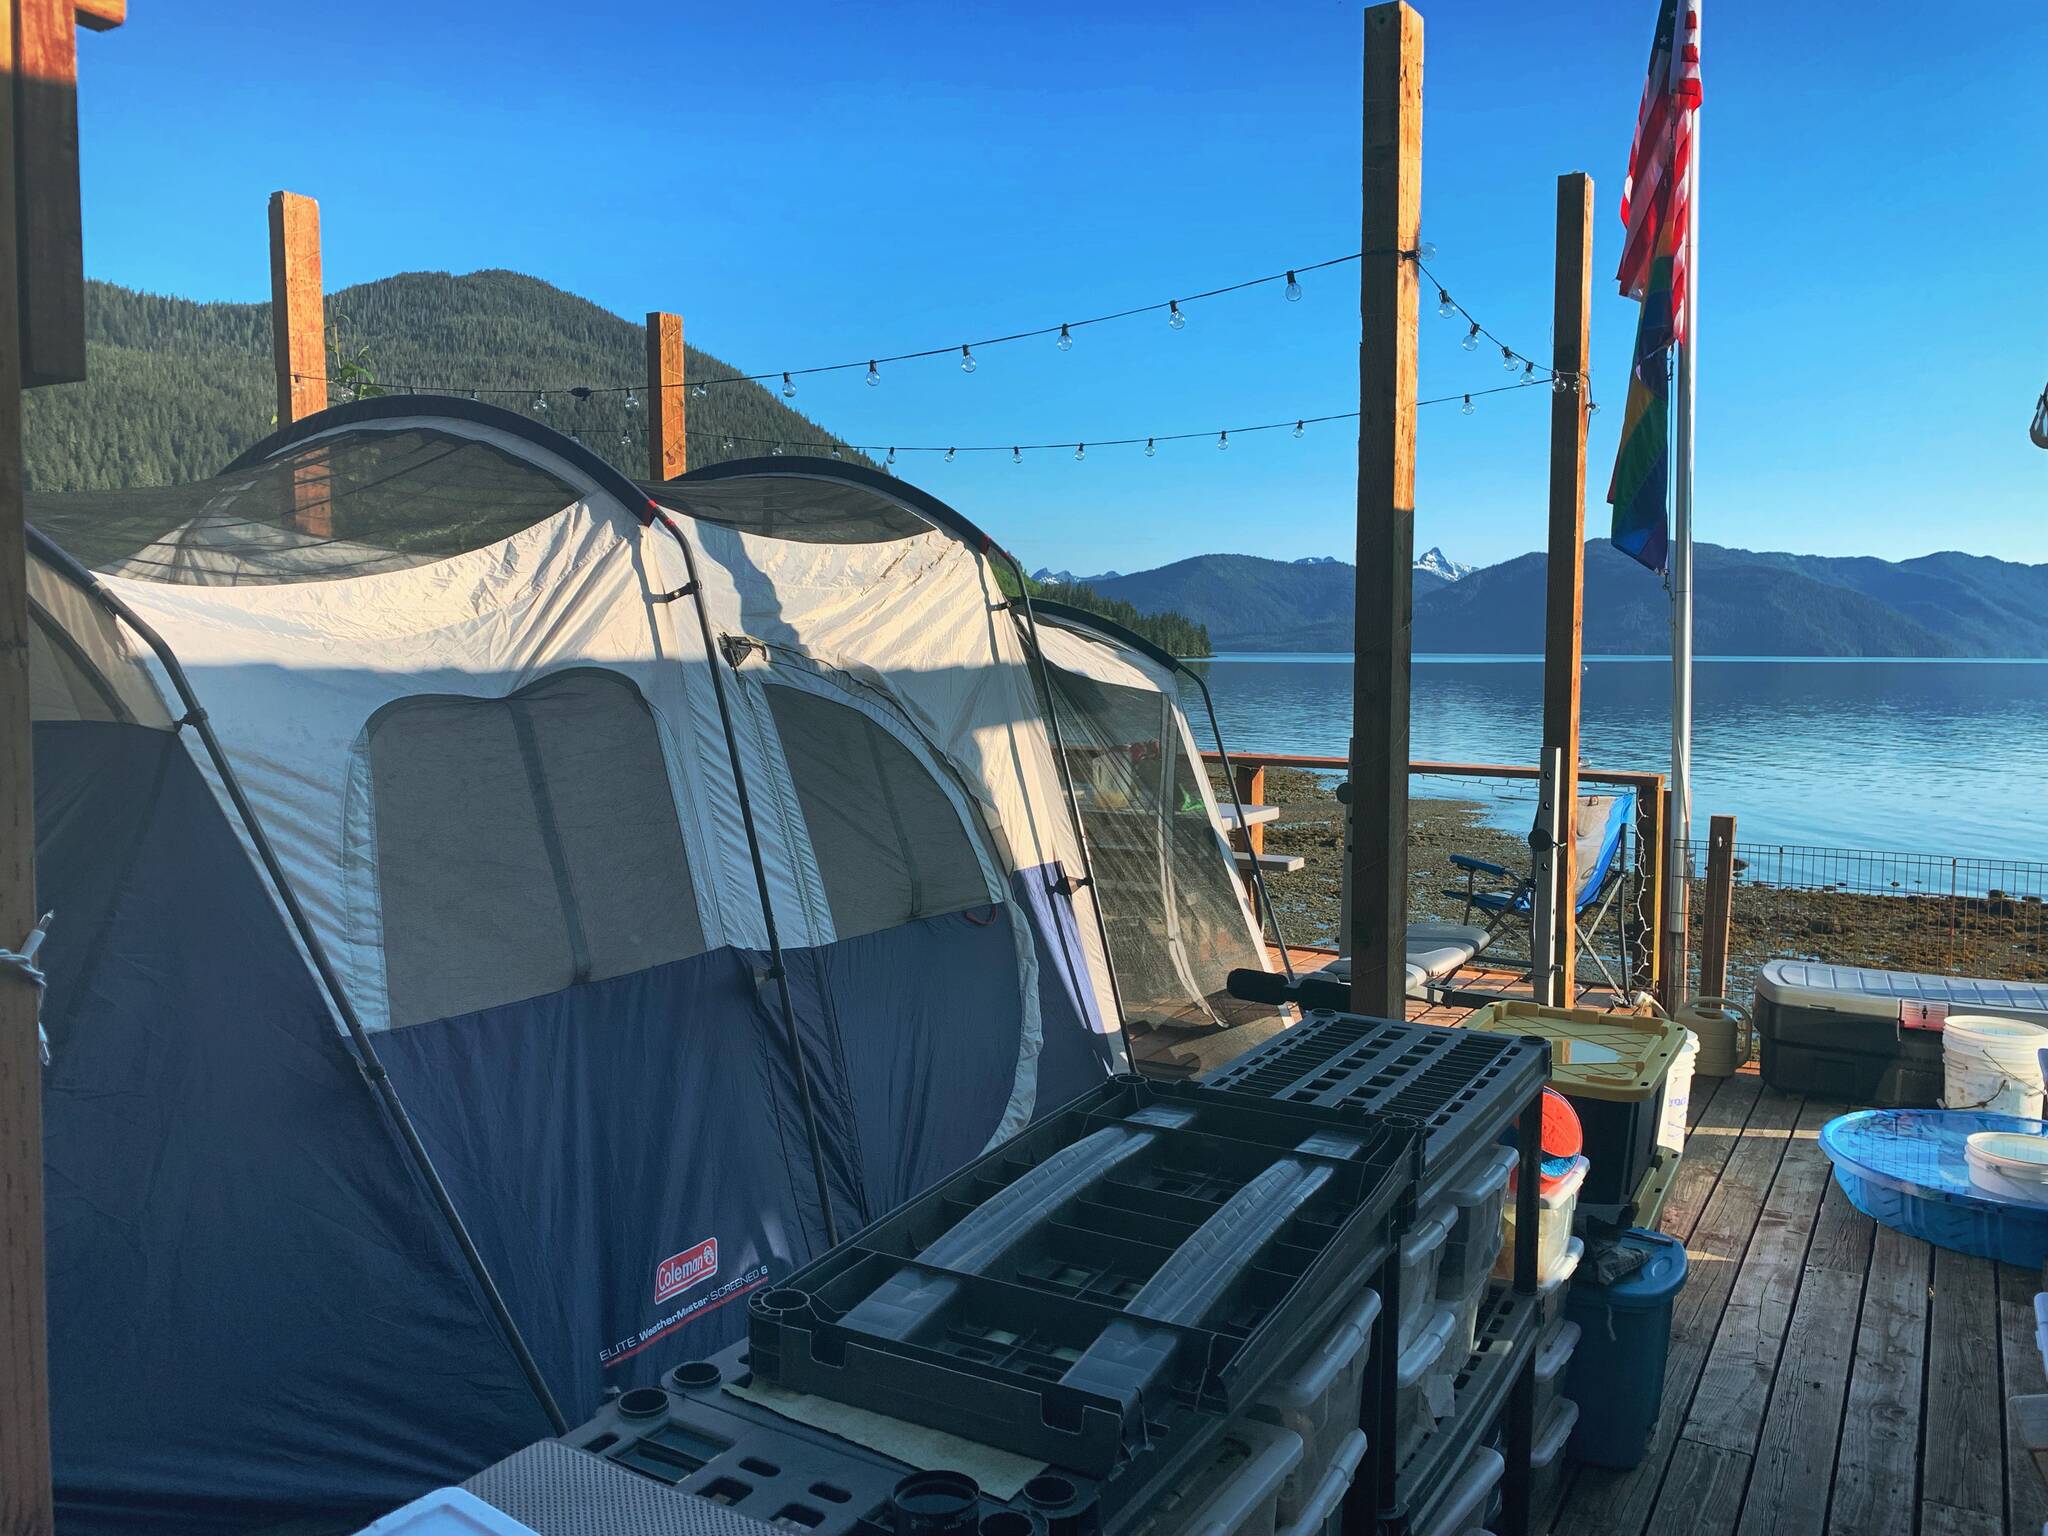 A tent is set up for grandkids on the deck at Mickey’s Fishcamp in Wrangell. (Vivian Faith Prescott / For the Capital City Weekly)